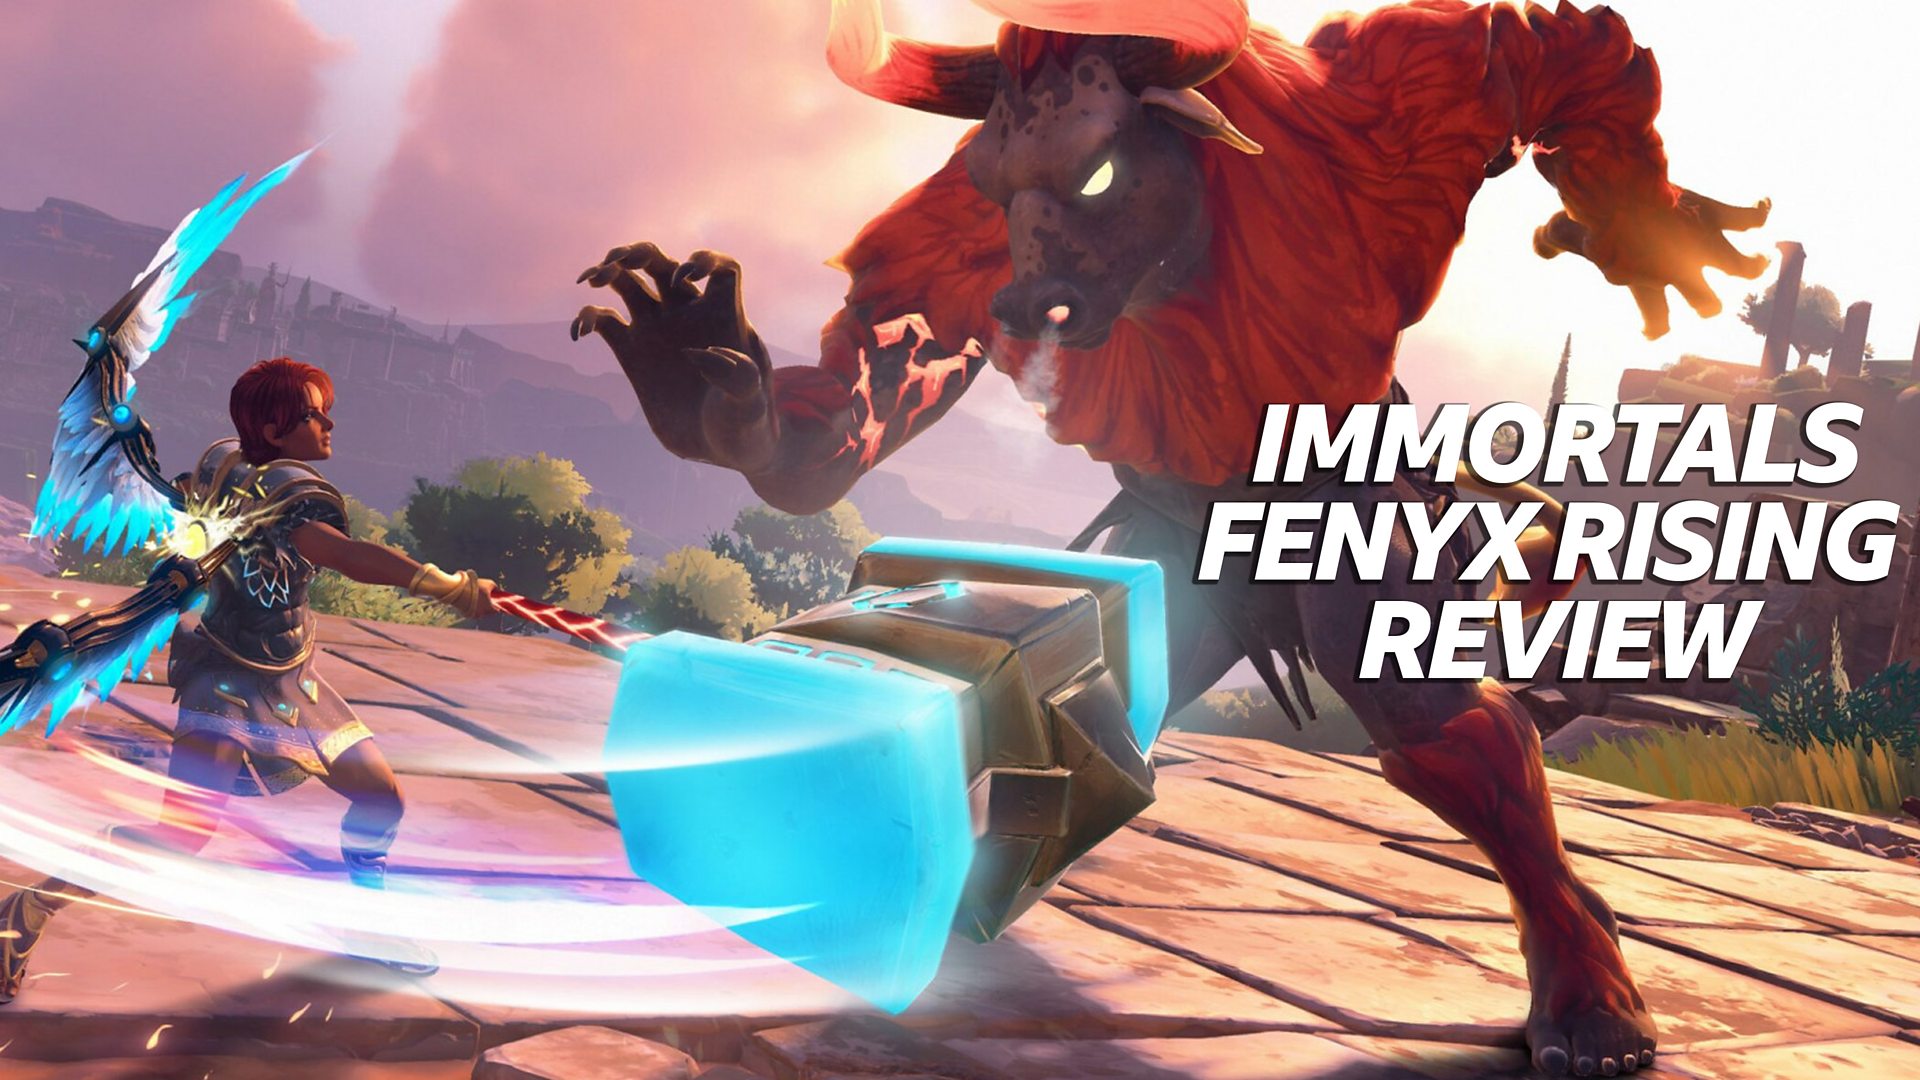 Watch the First Hour+ of Gameplay for IMMORTALS FENYX RISING